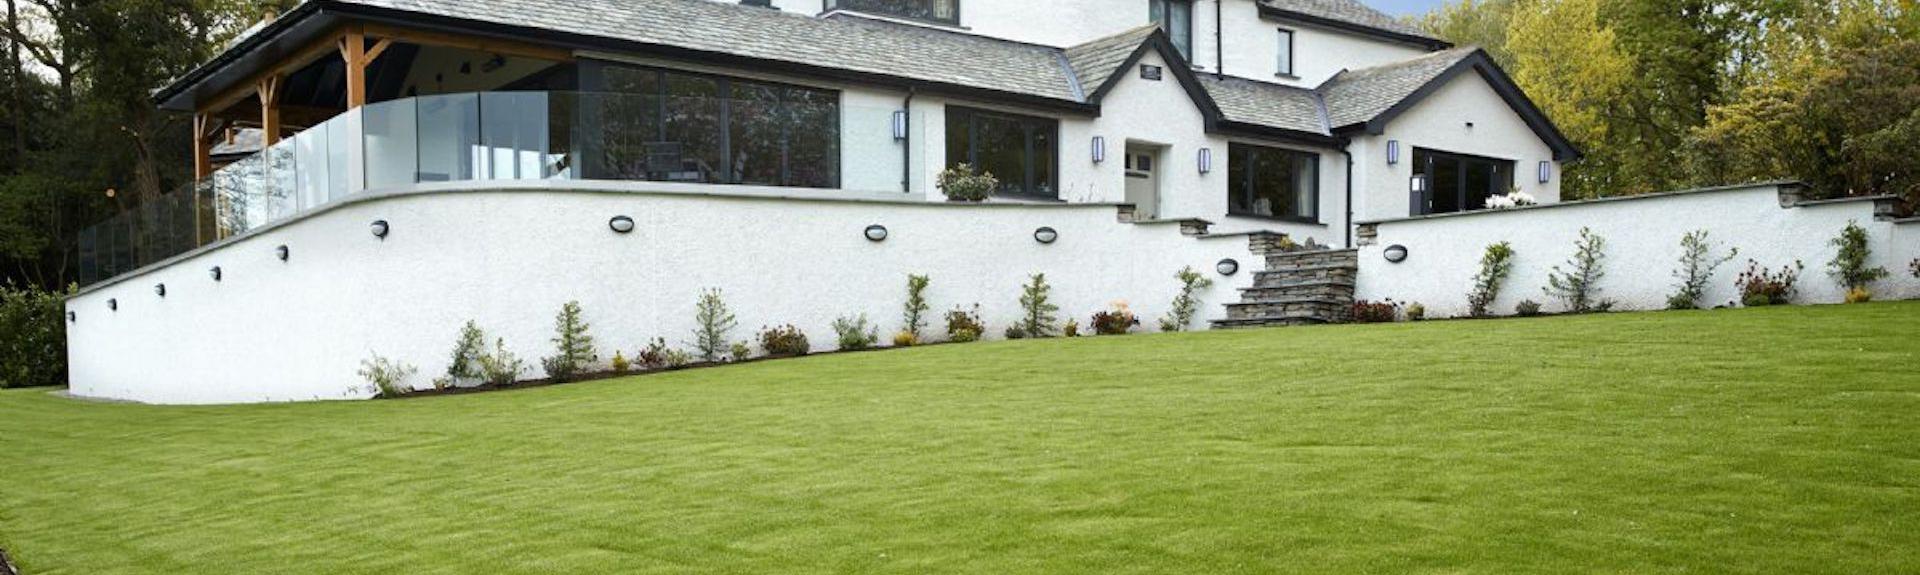 Large Windermere holiday cottage on a terrace overlooking a spacious lawn.